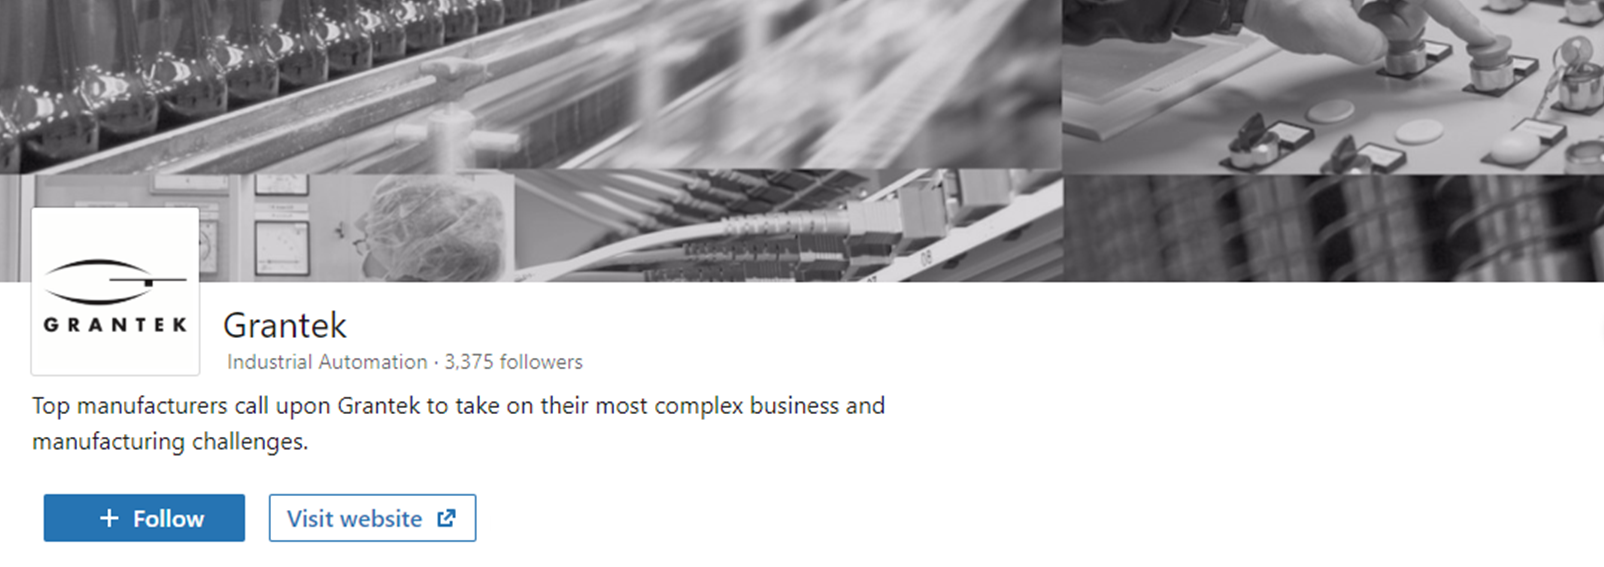 Stay Up to Date with Grantek – Follow Us on LinkedIn